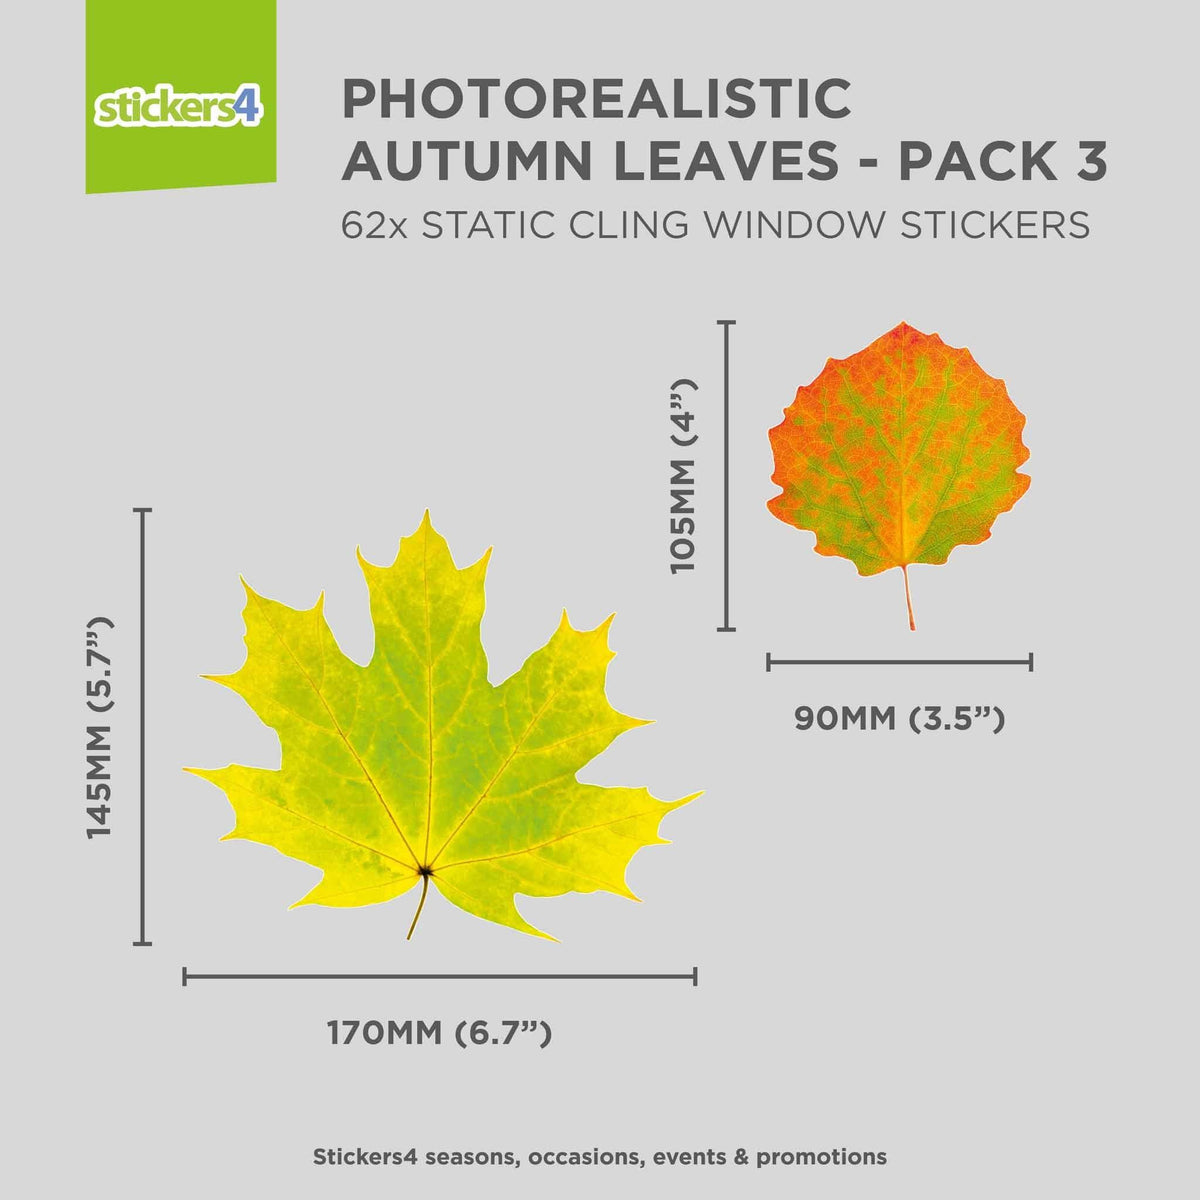 Photorealistic Autumn Leaves Shop Window Stickers - Pack 3 Autumn Window Display